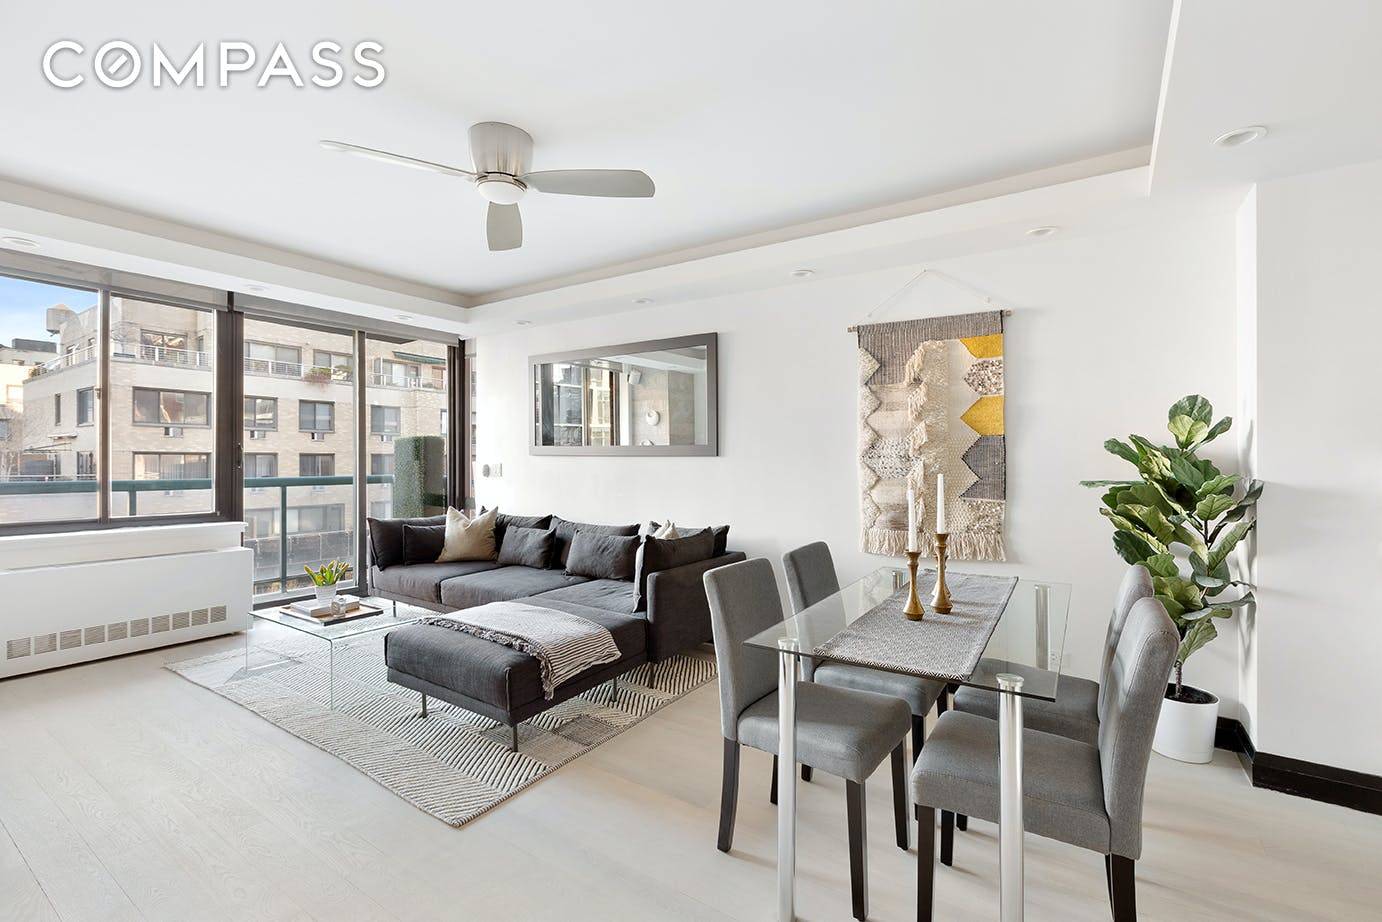 Not a detail was overlooked at this beautifully renovated one bedroom condo where Flatiron meets Greenwich Village.